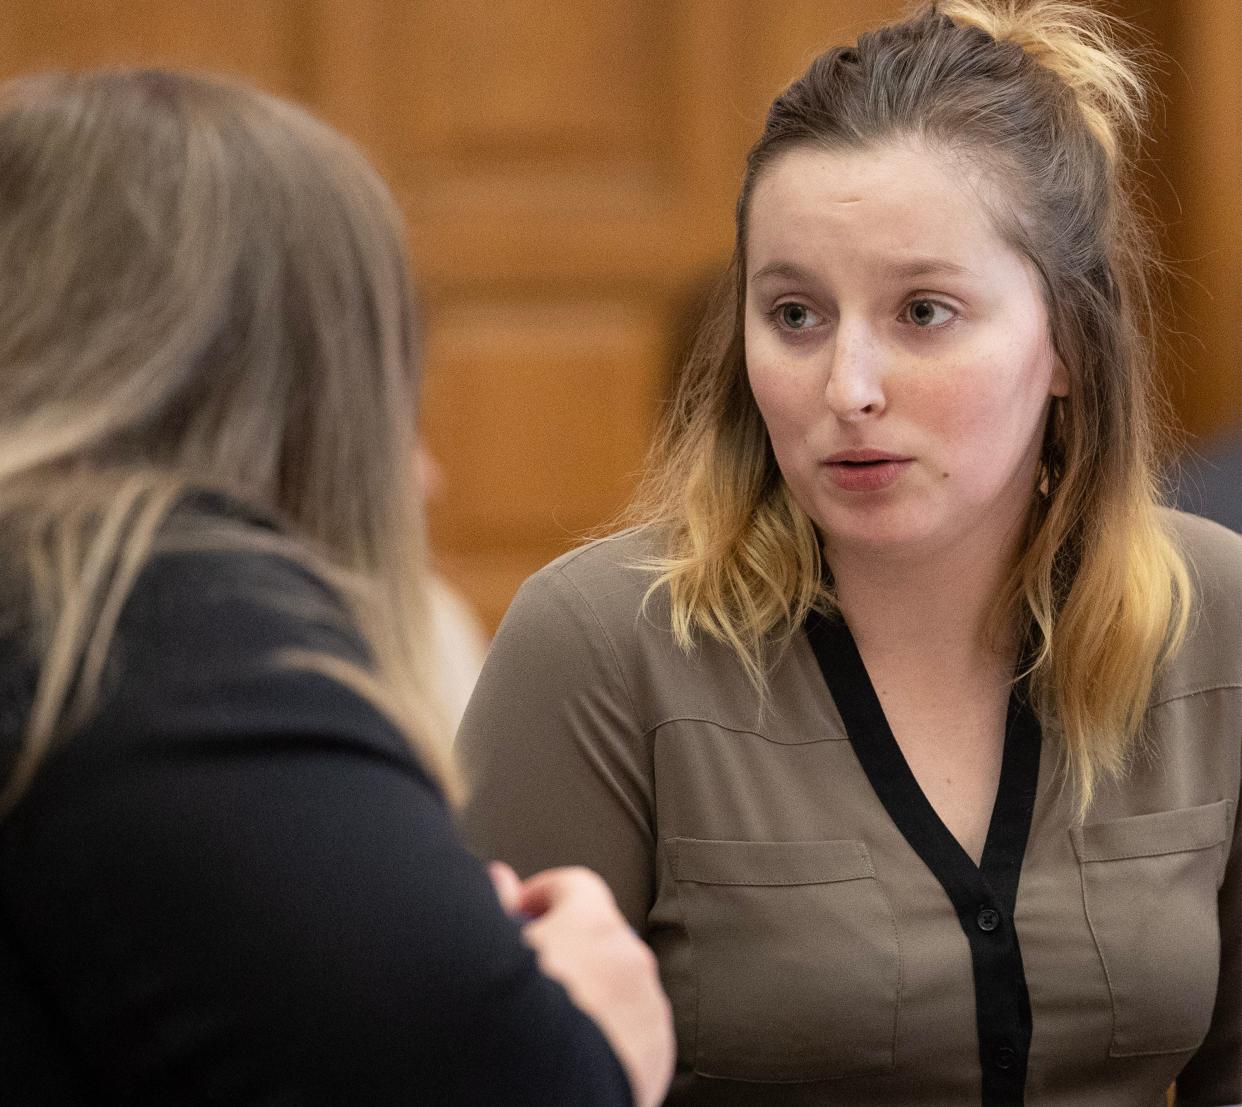 Marissa Smith, right, speaks with her public defender Katelyn Shoemaker in front of Stark County Common Pleas Judge Natalie Haupt.